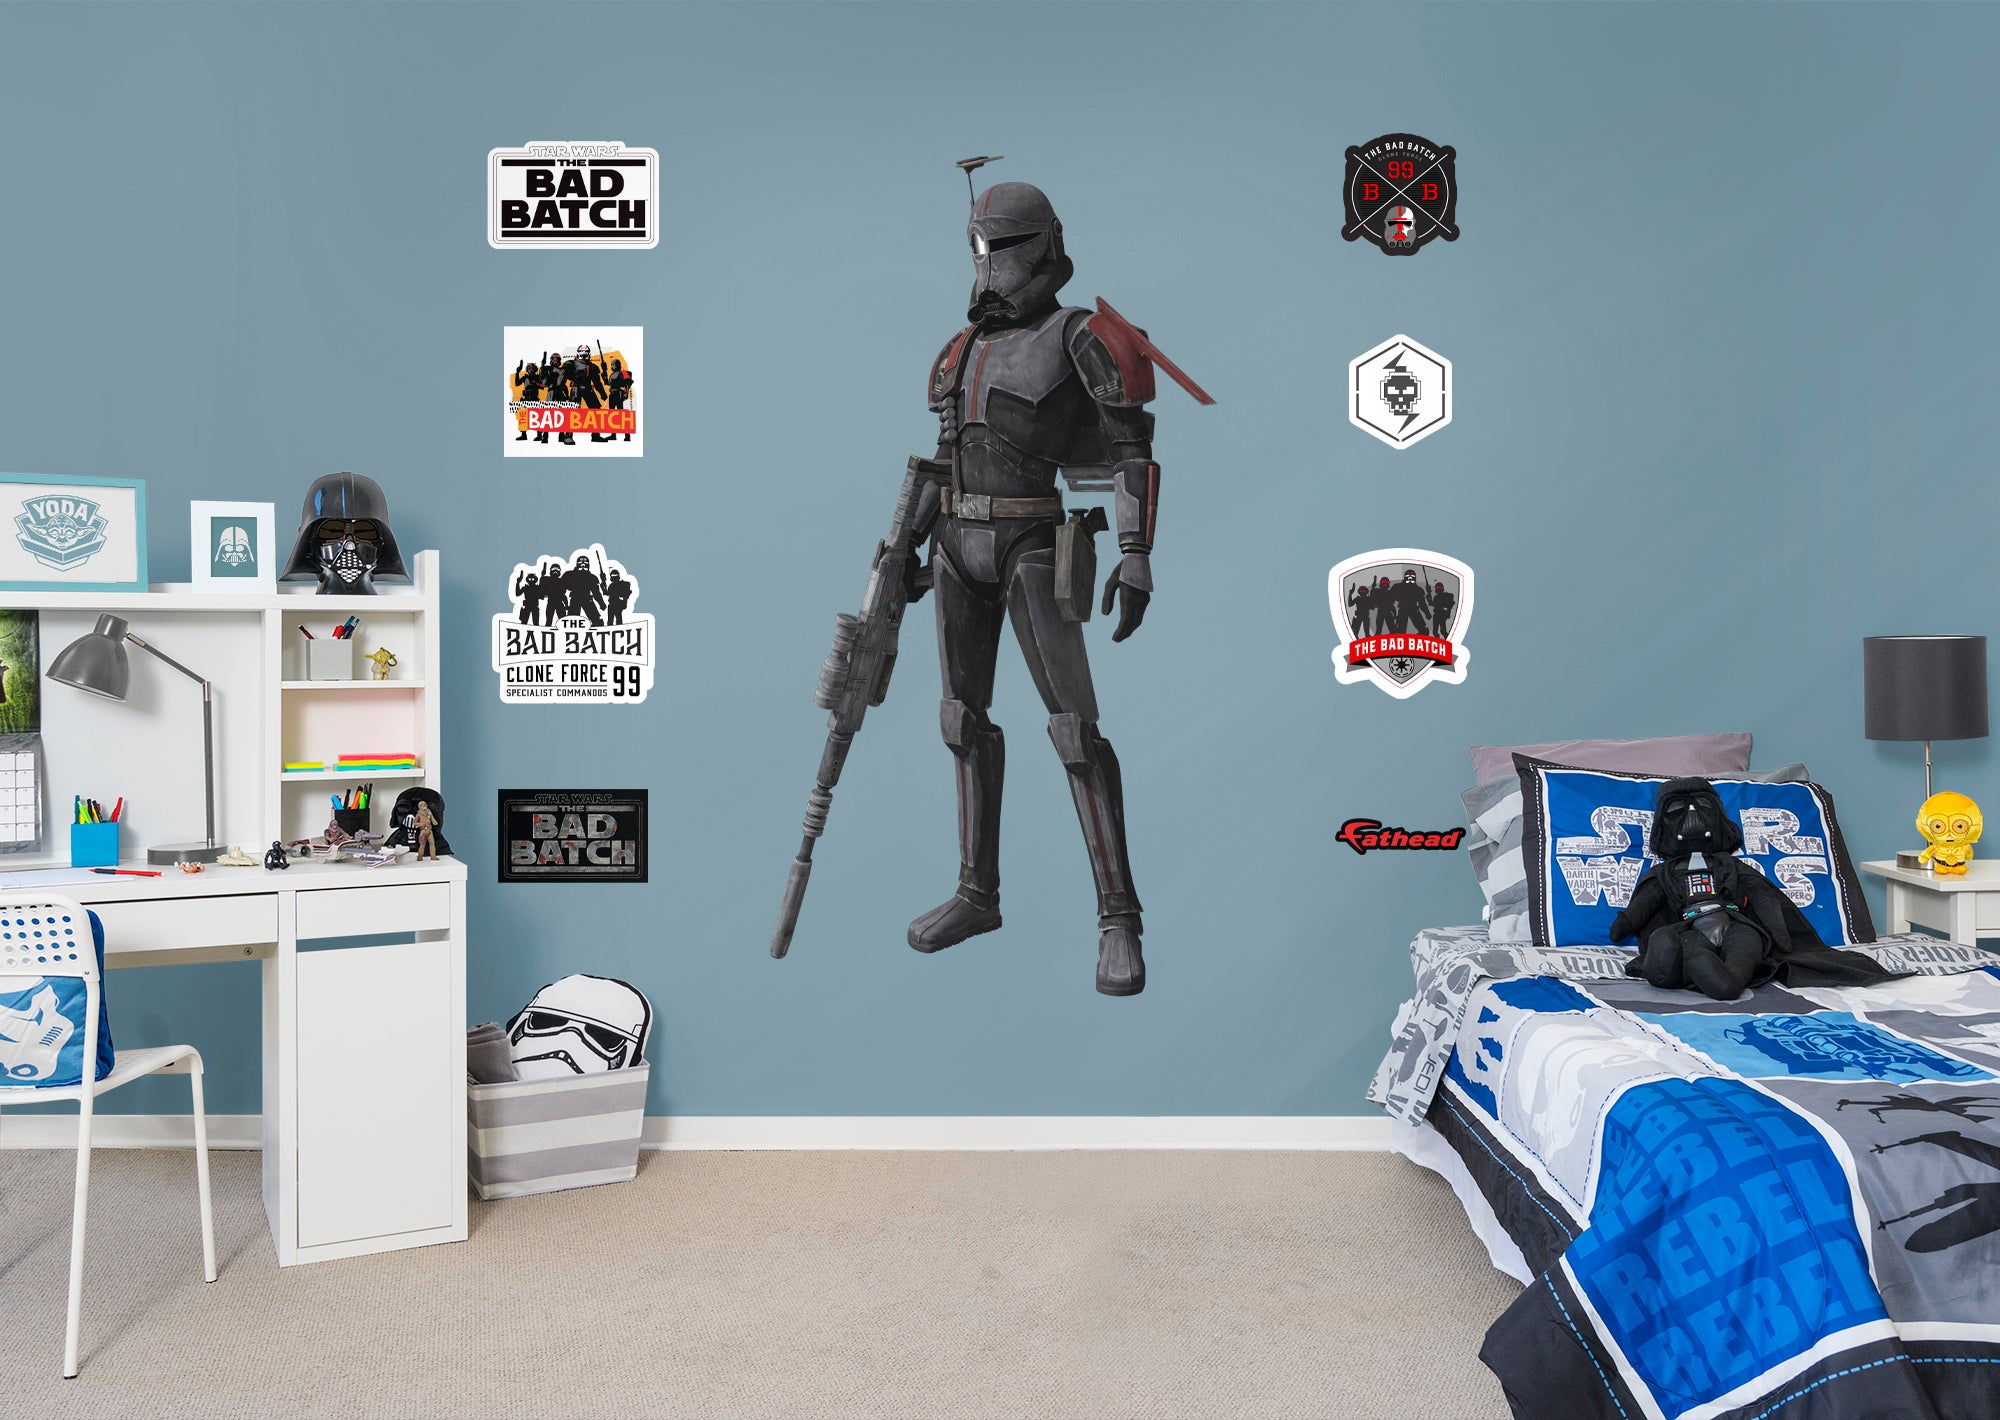 Bad Batch Crosshair - Officially Licensed Star Wars Removable Wall Decal Giant Character + 2 Decals by Fathead | Vinyl